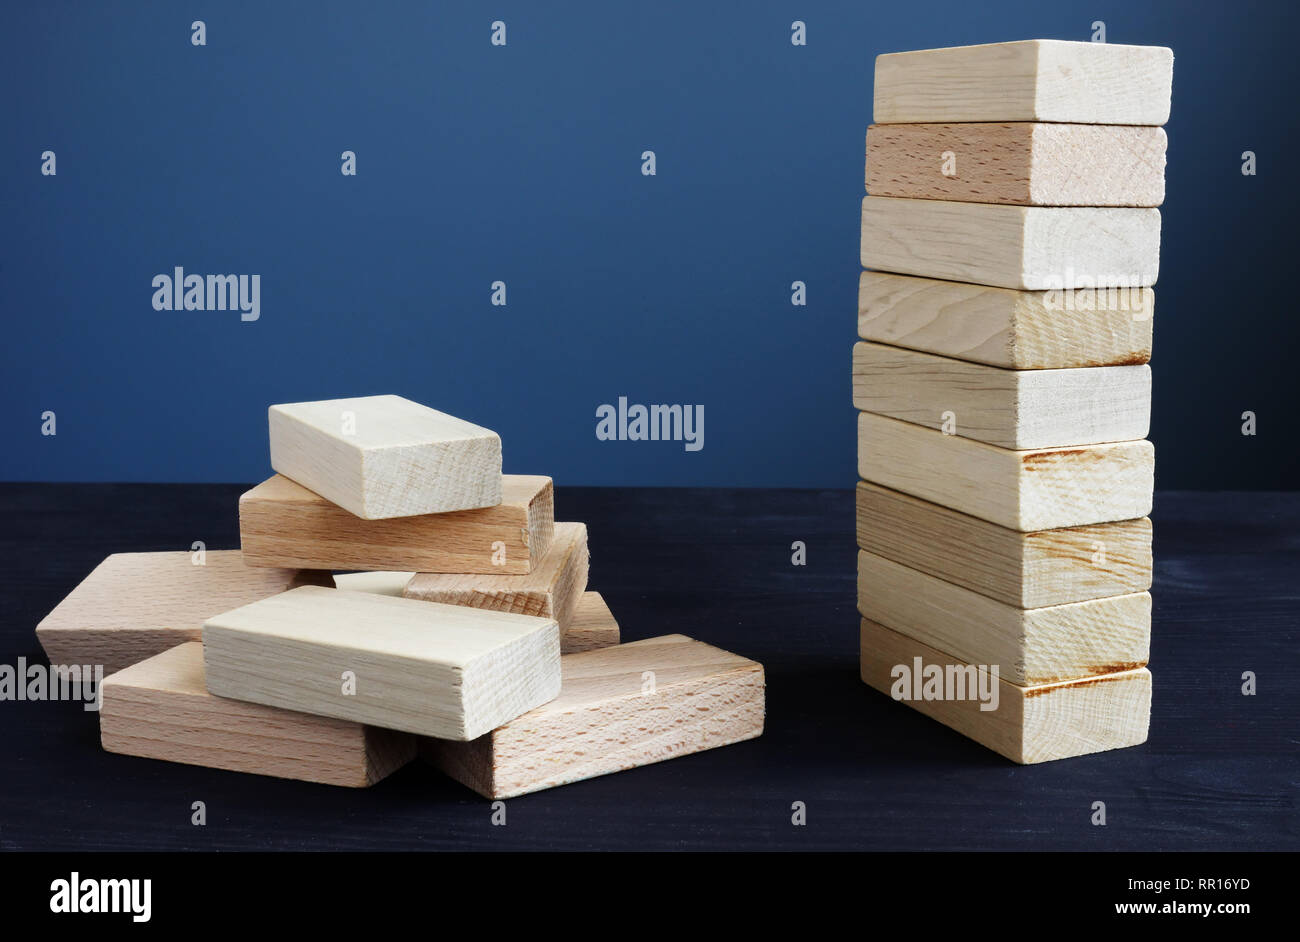 Organization, strategy and risk in business concept. Tower and piled up from wooden bricks. Stock Photo